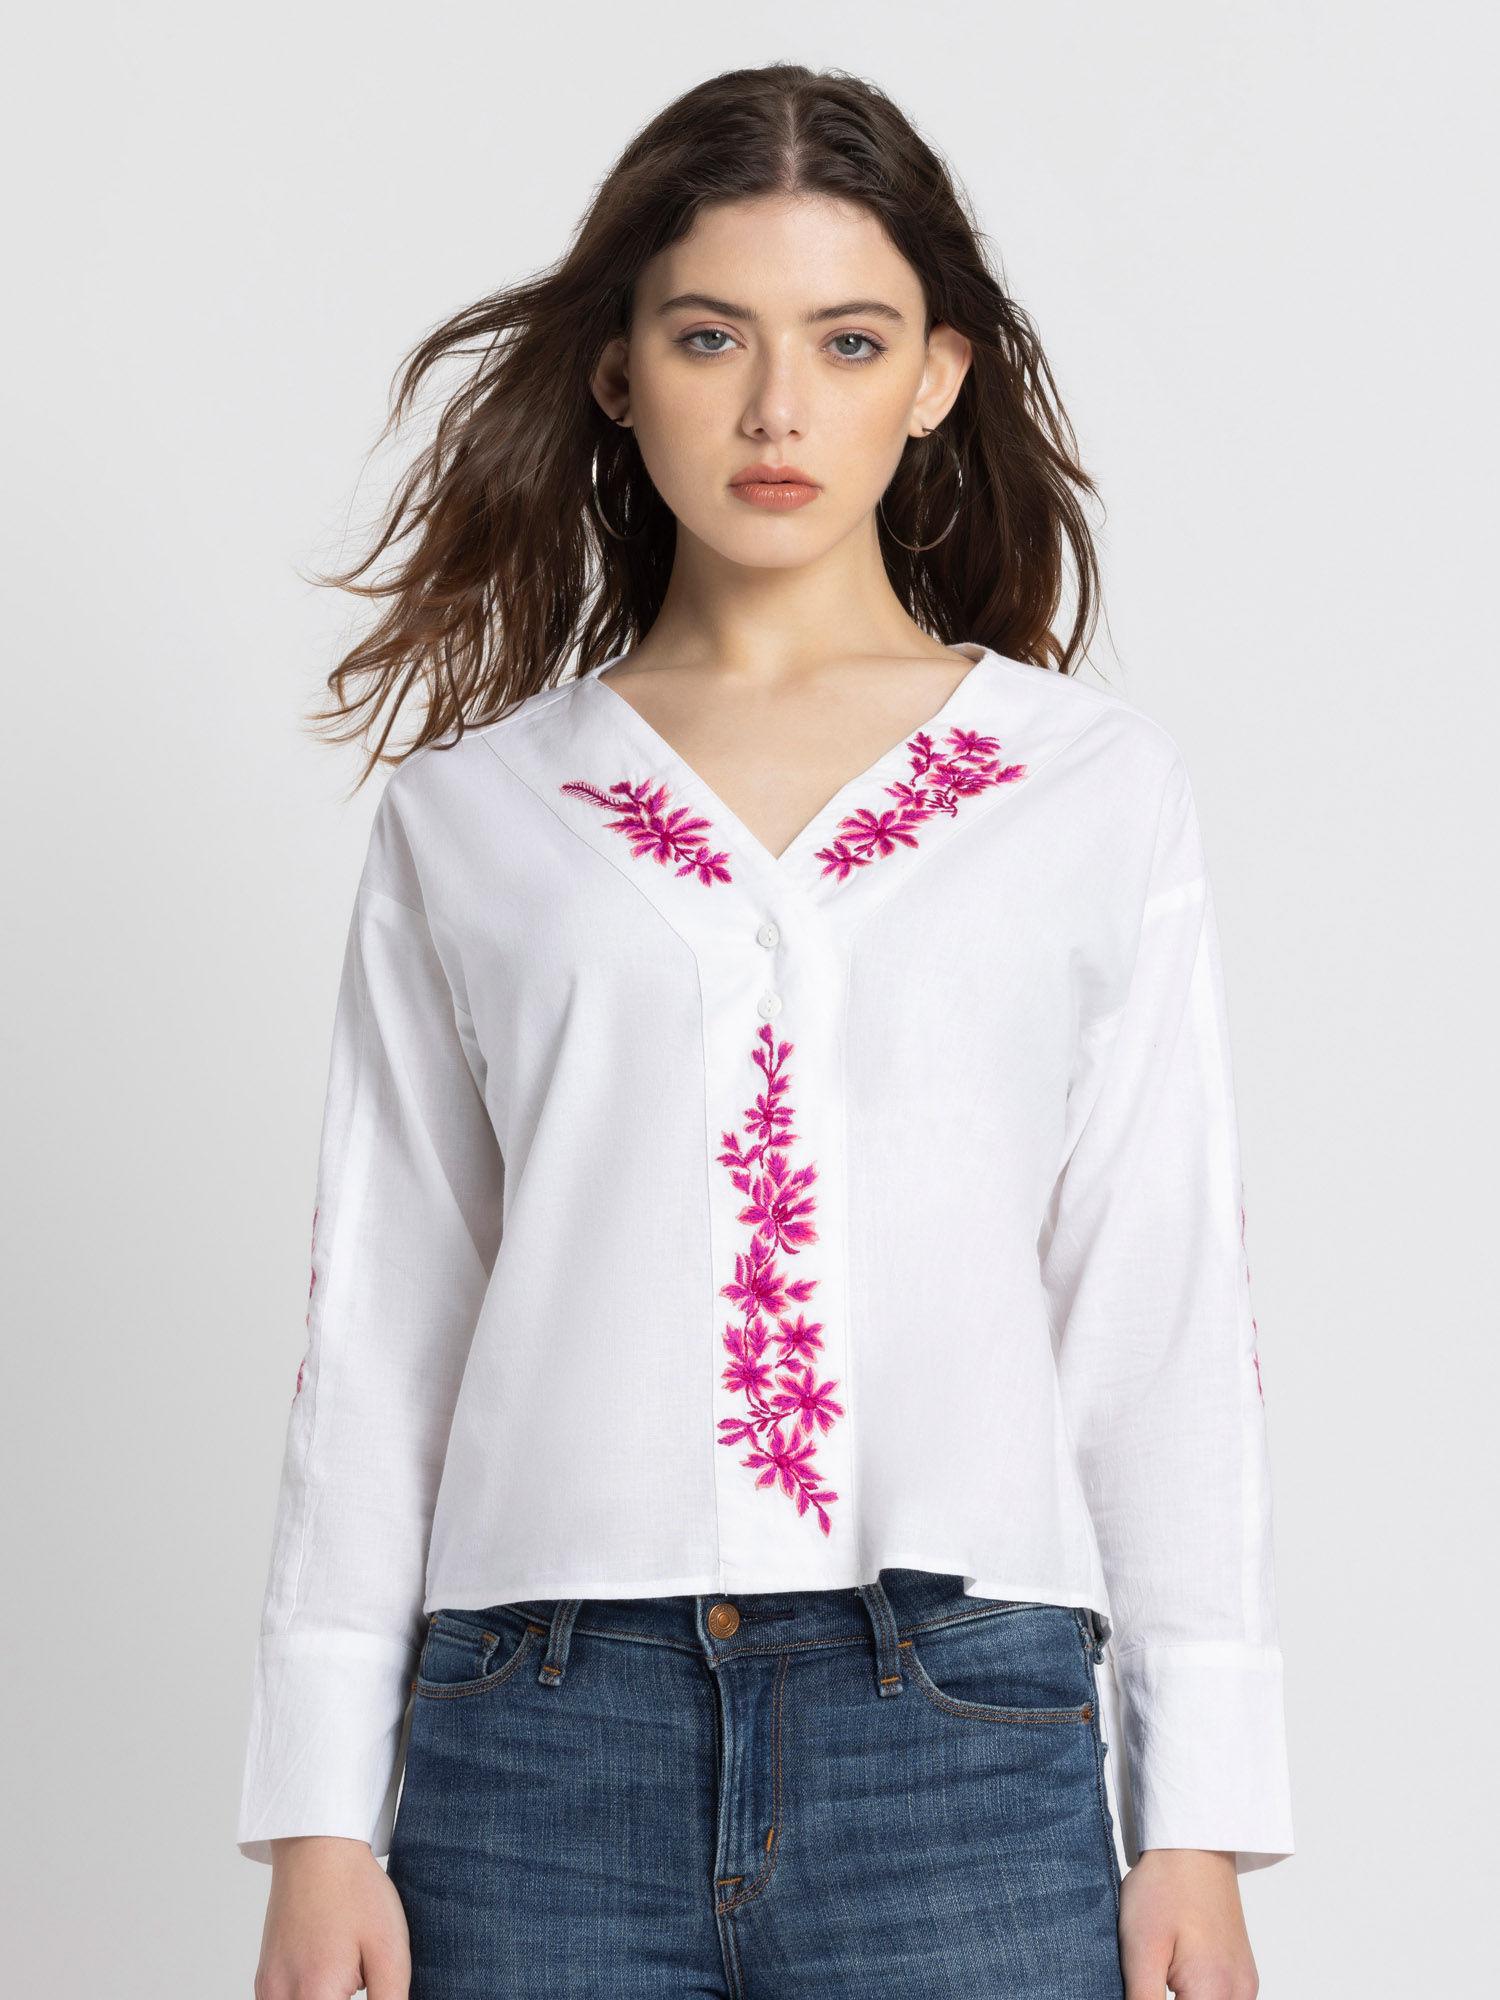 v-neck white embroidered long sleeves casual top for women